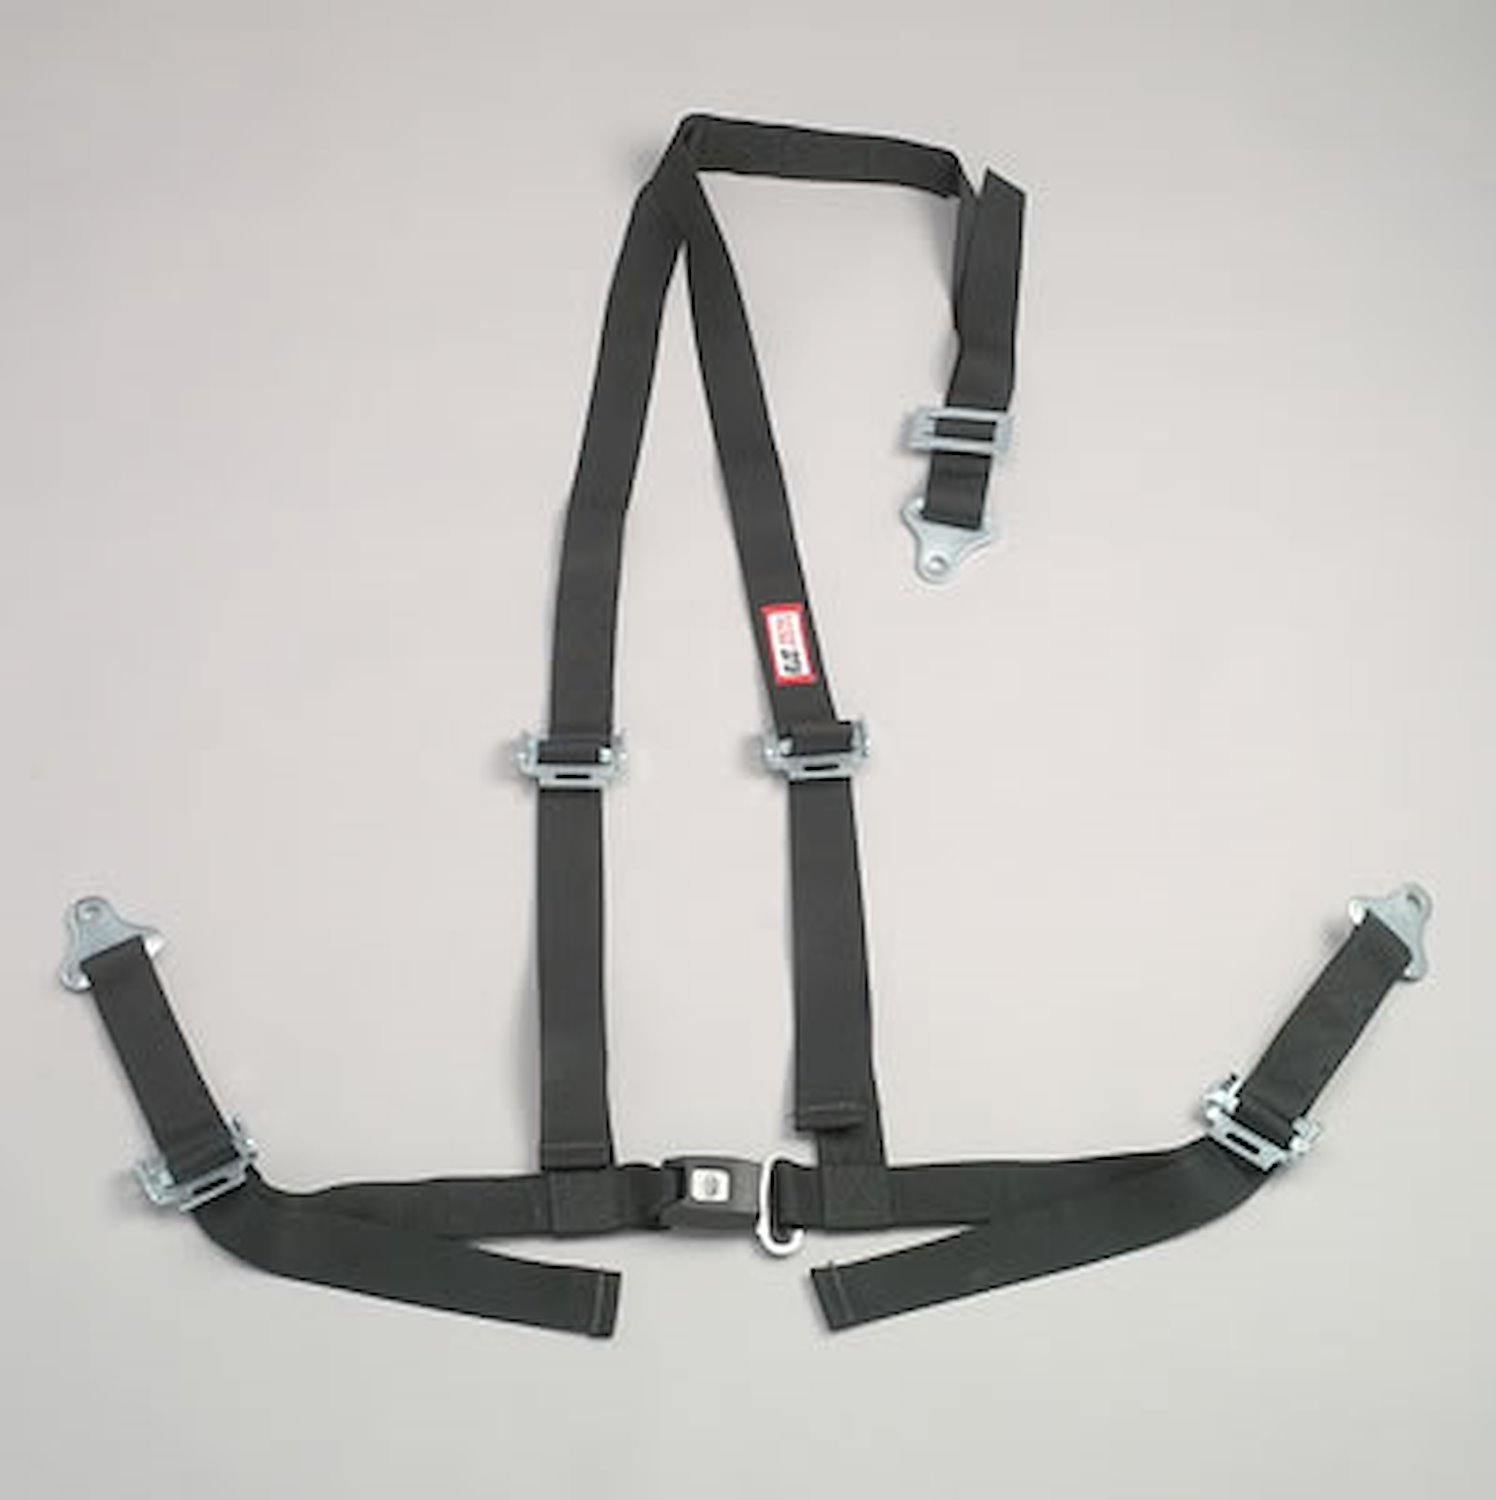 NON-SFI B&T HARNESS 2 PULL UP Lap Belt 2 S. H. Y FLOOR Mount ALL WRAP ENDS RED